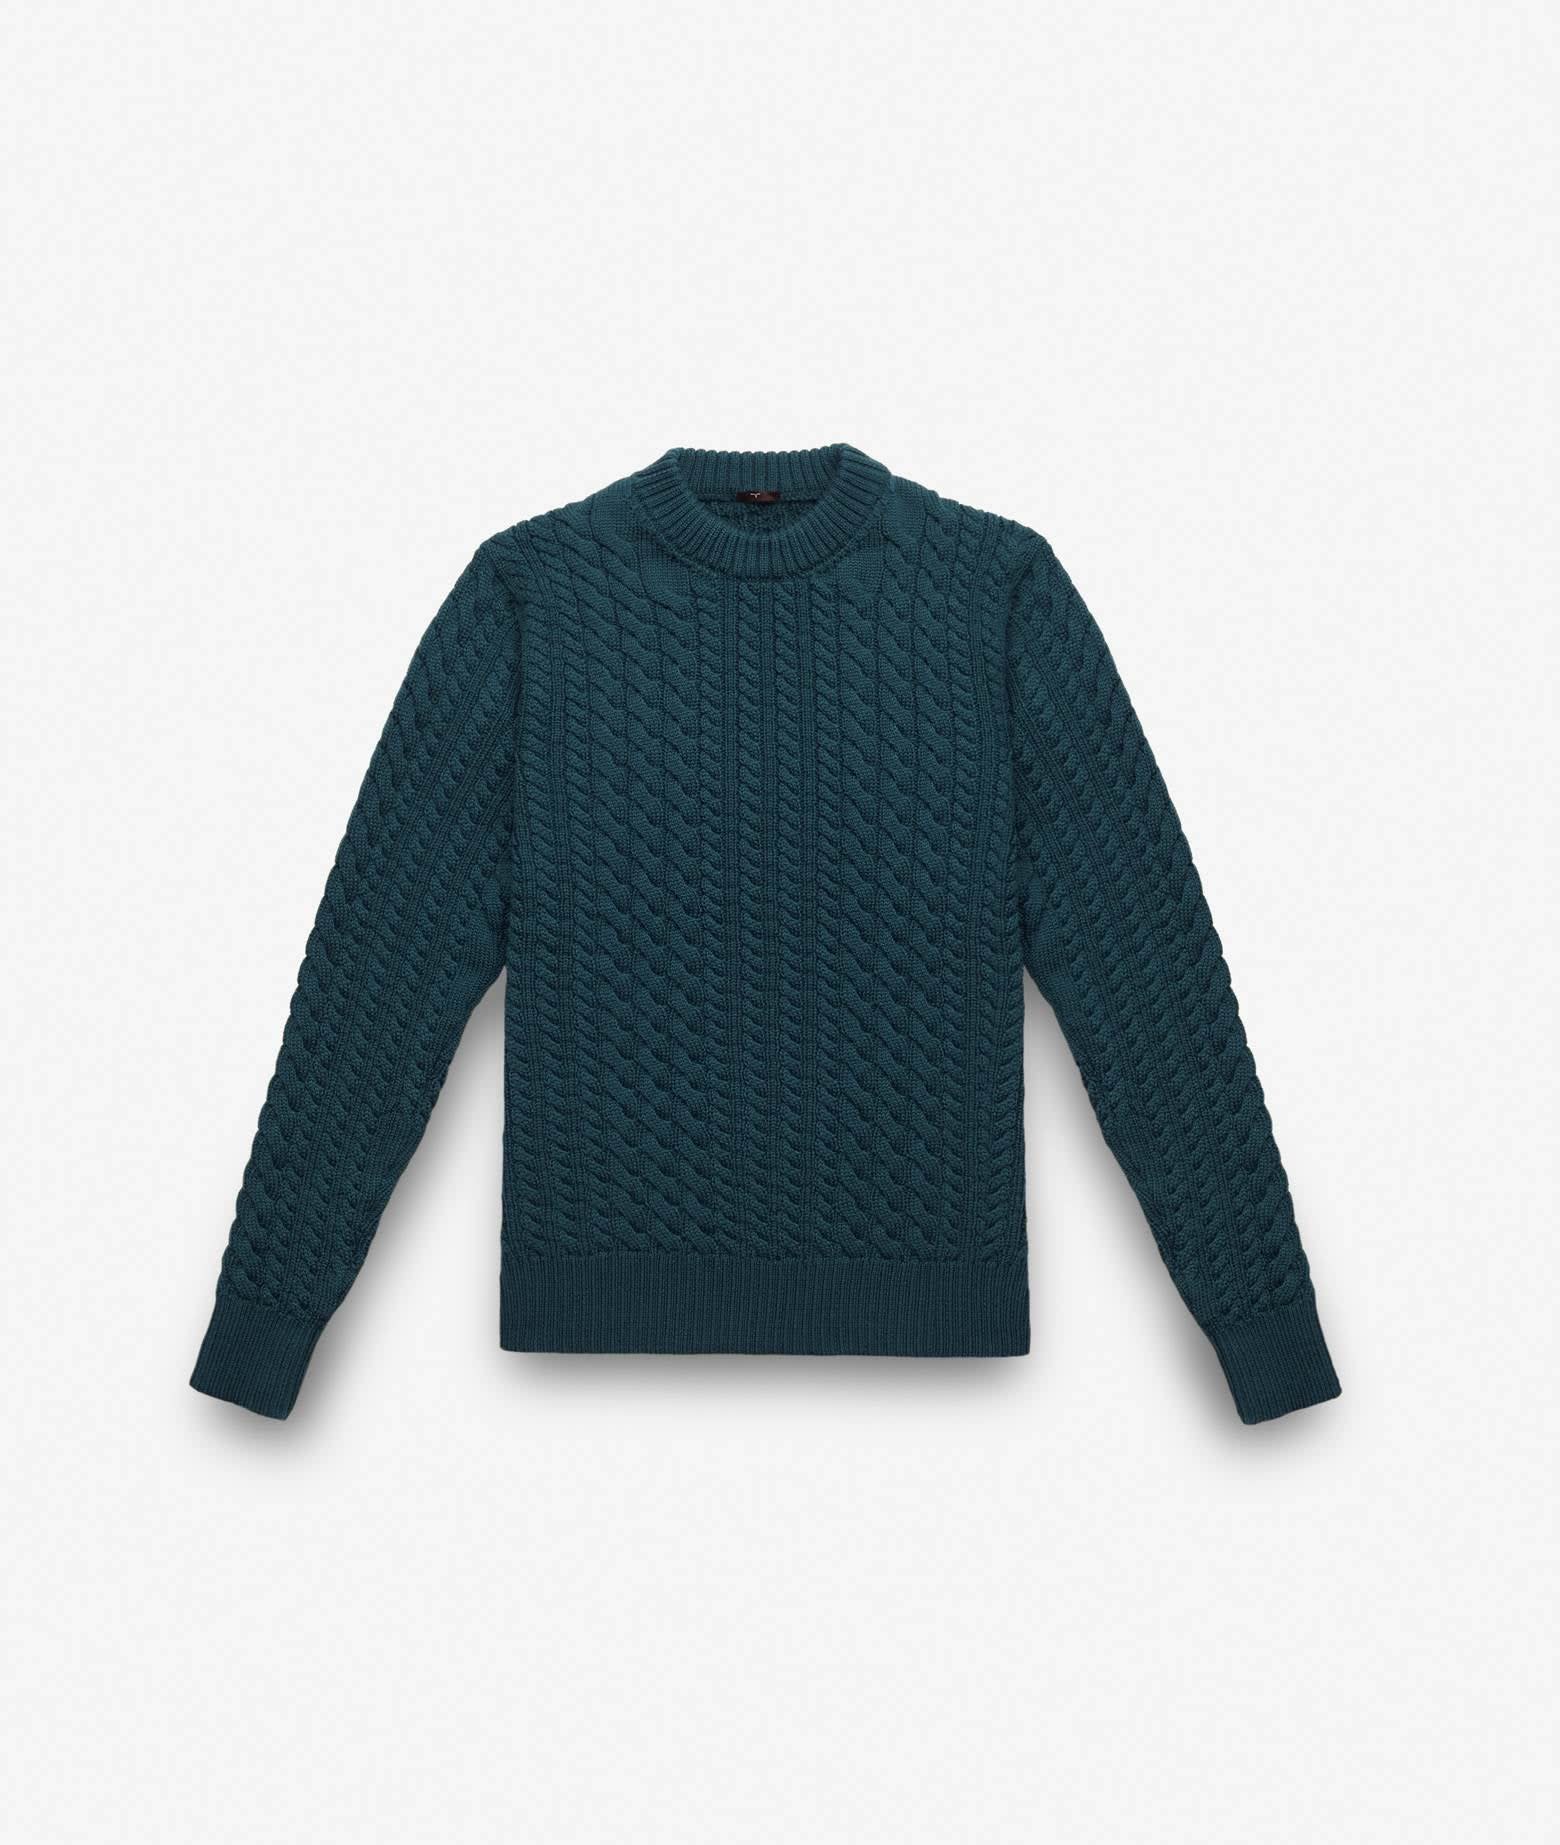 Larusmiani Cable Knit Sweater Col Du Pillon Sweater In Teal